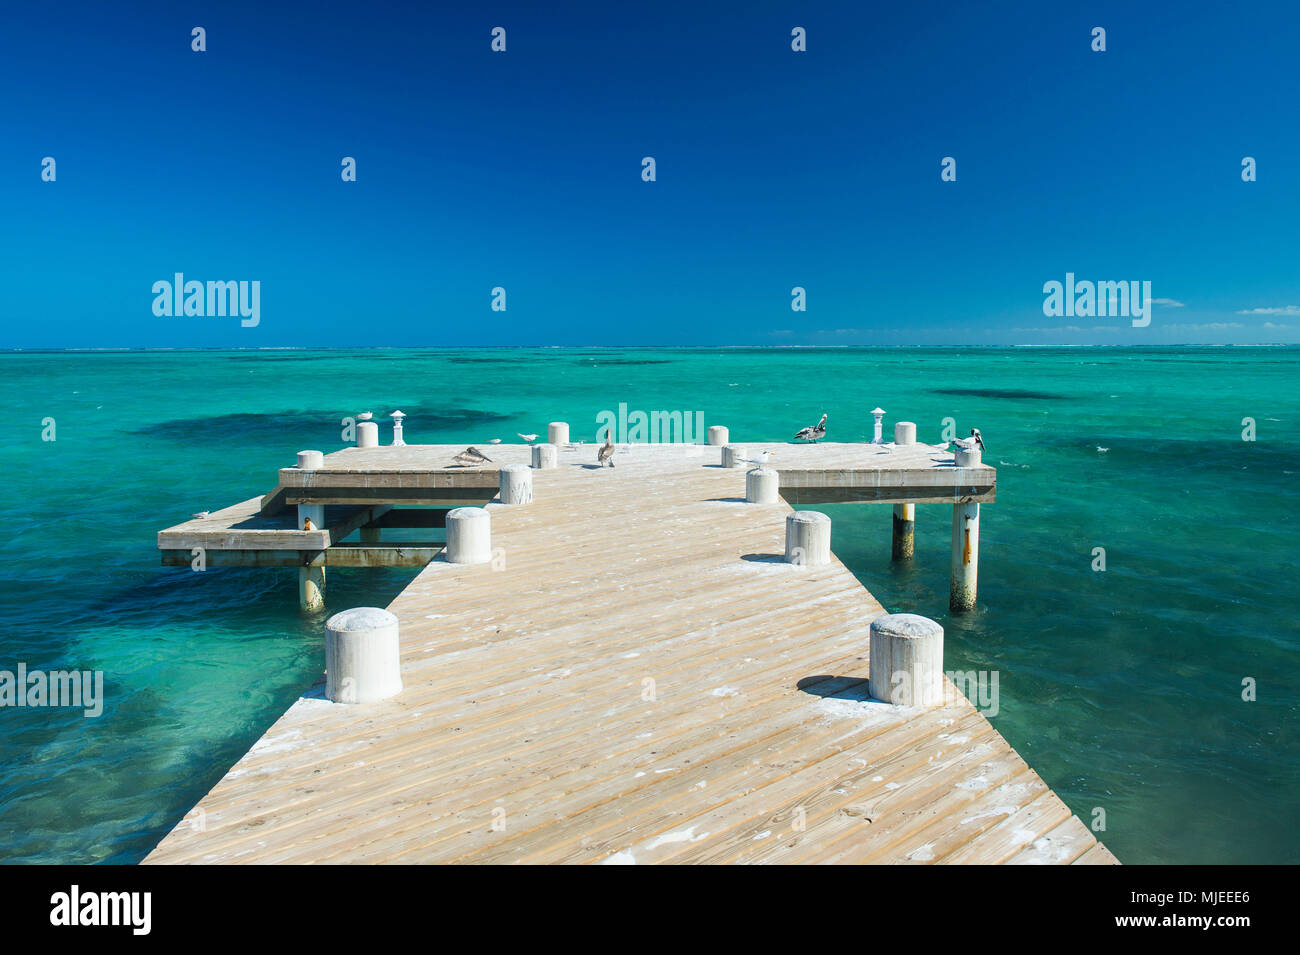 Long wooden pier in the turquoise waters of Providenciales, Turks and Caicos Stock Photo